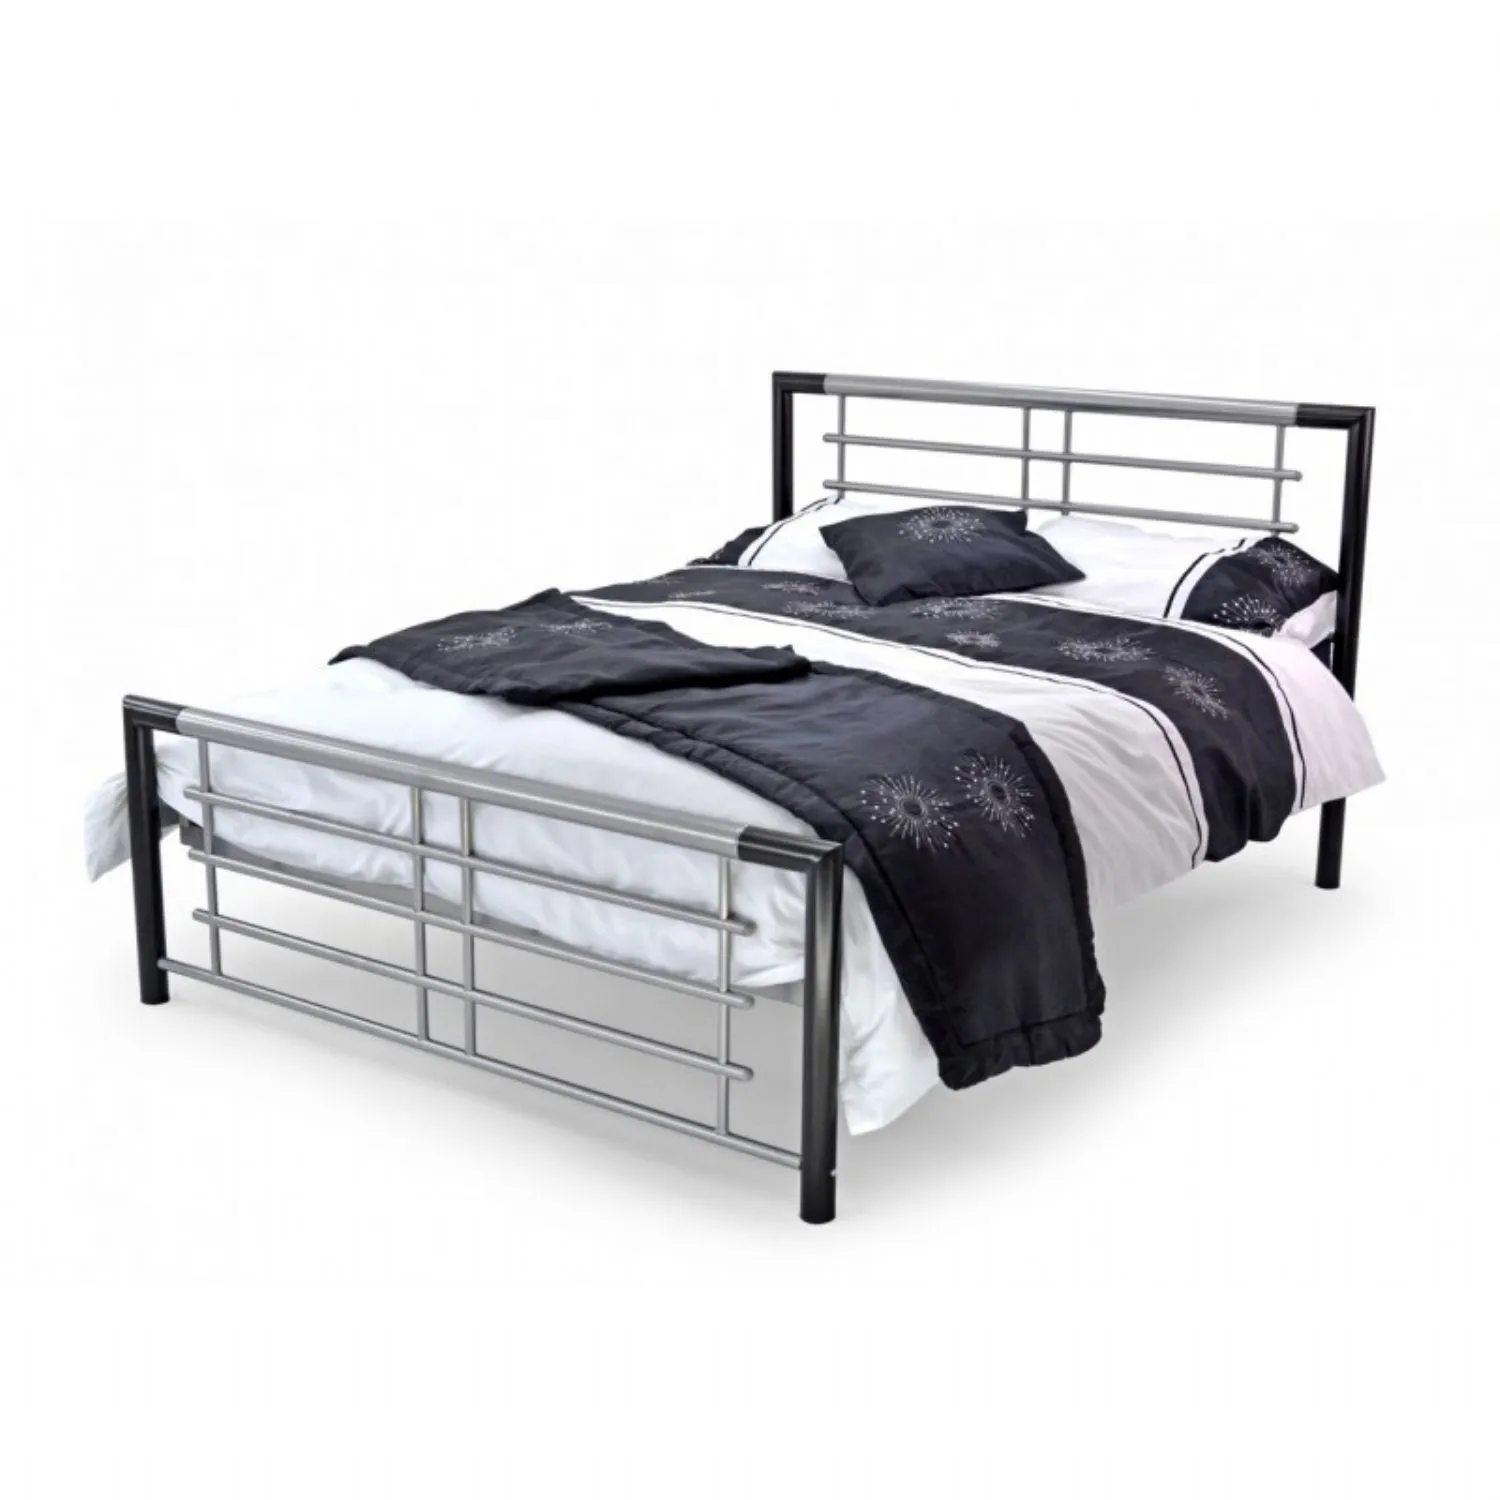 Black and Silver Mesh Based Metal Bed 5ft King Size